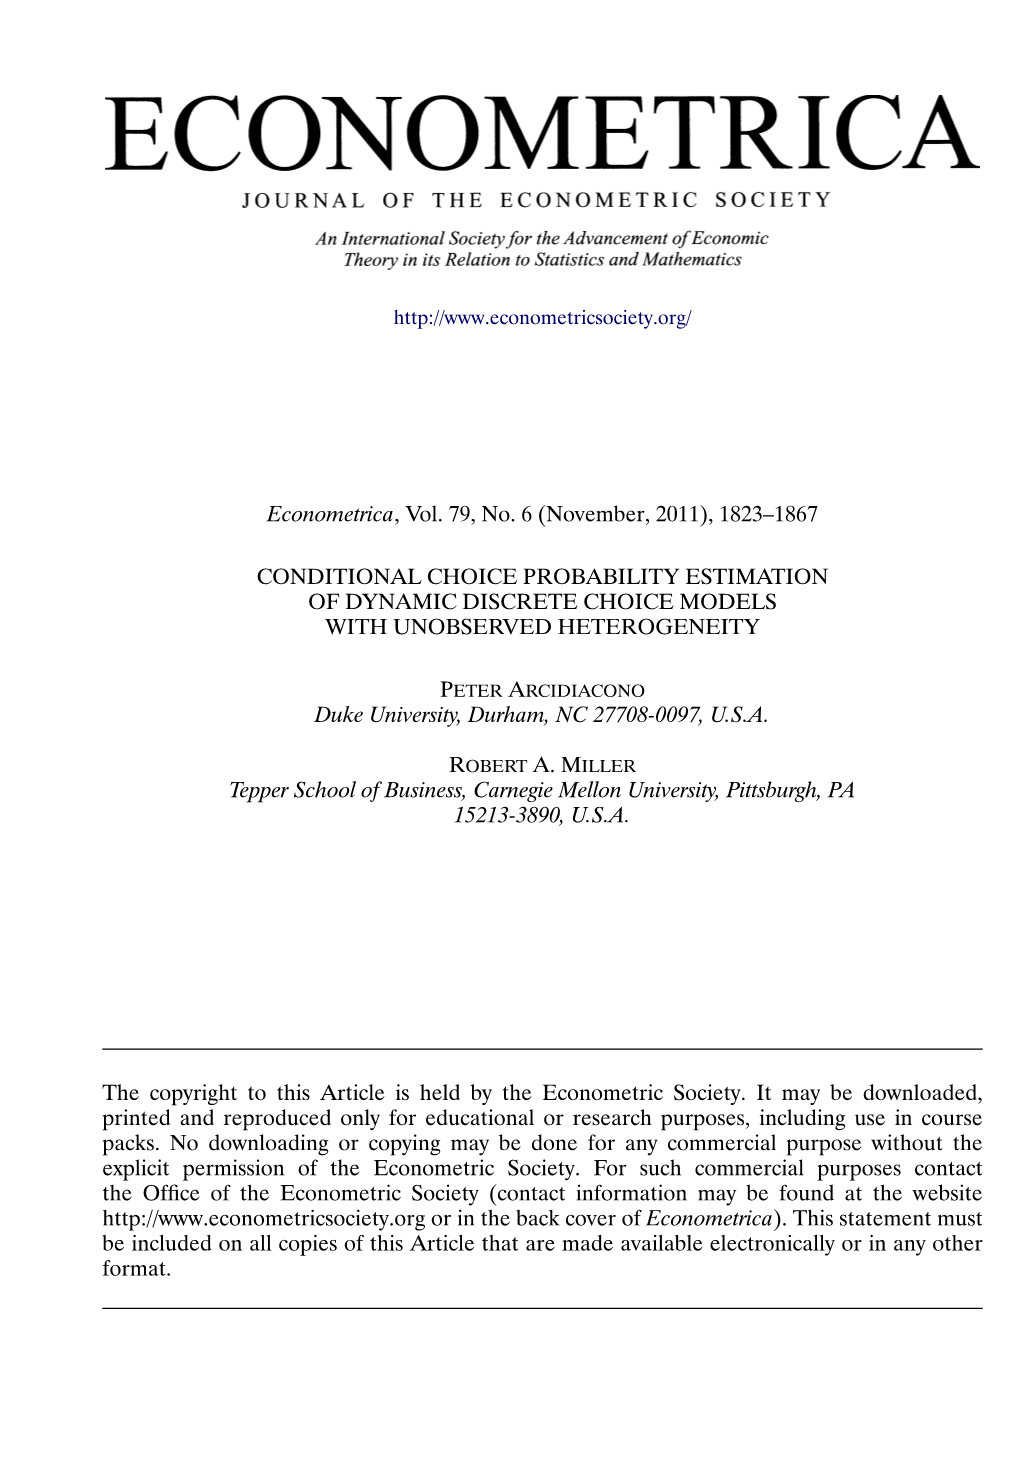 Conditional Choice Probability Estimation of Dynamic Discrete Choice Models with Unobserved Heterogeneity